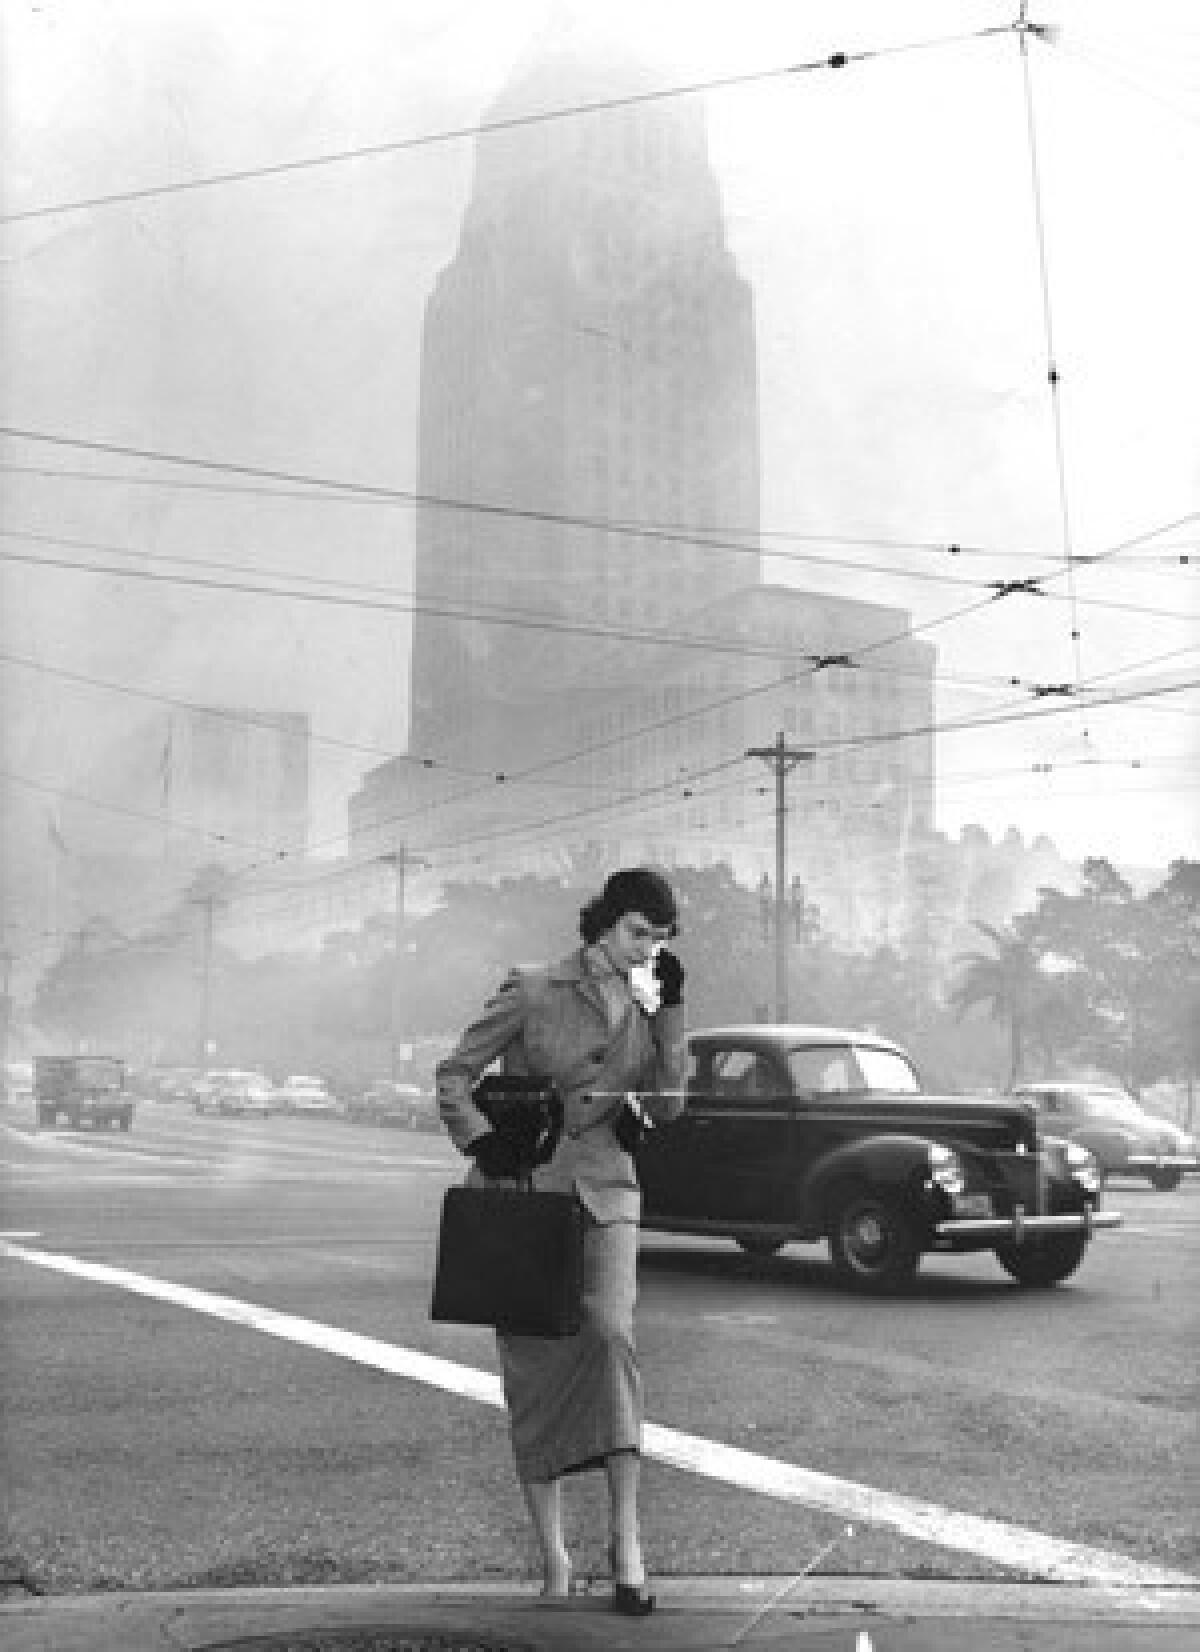 The smog near L.A. City Hall is so bad in 1953 that pedestrians carry rags to wipe tears.